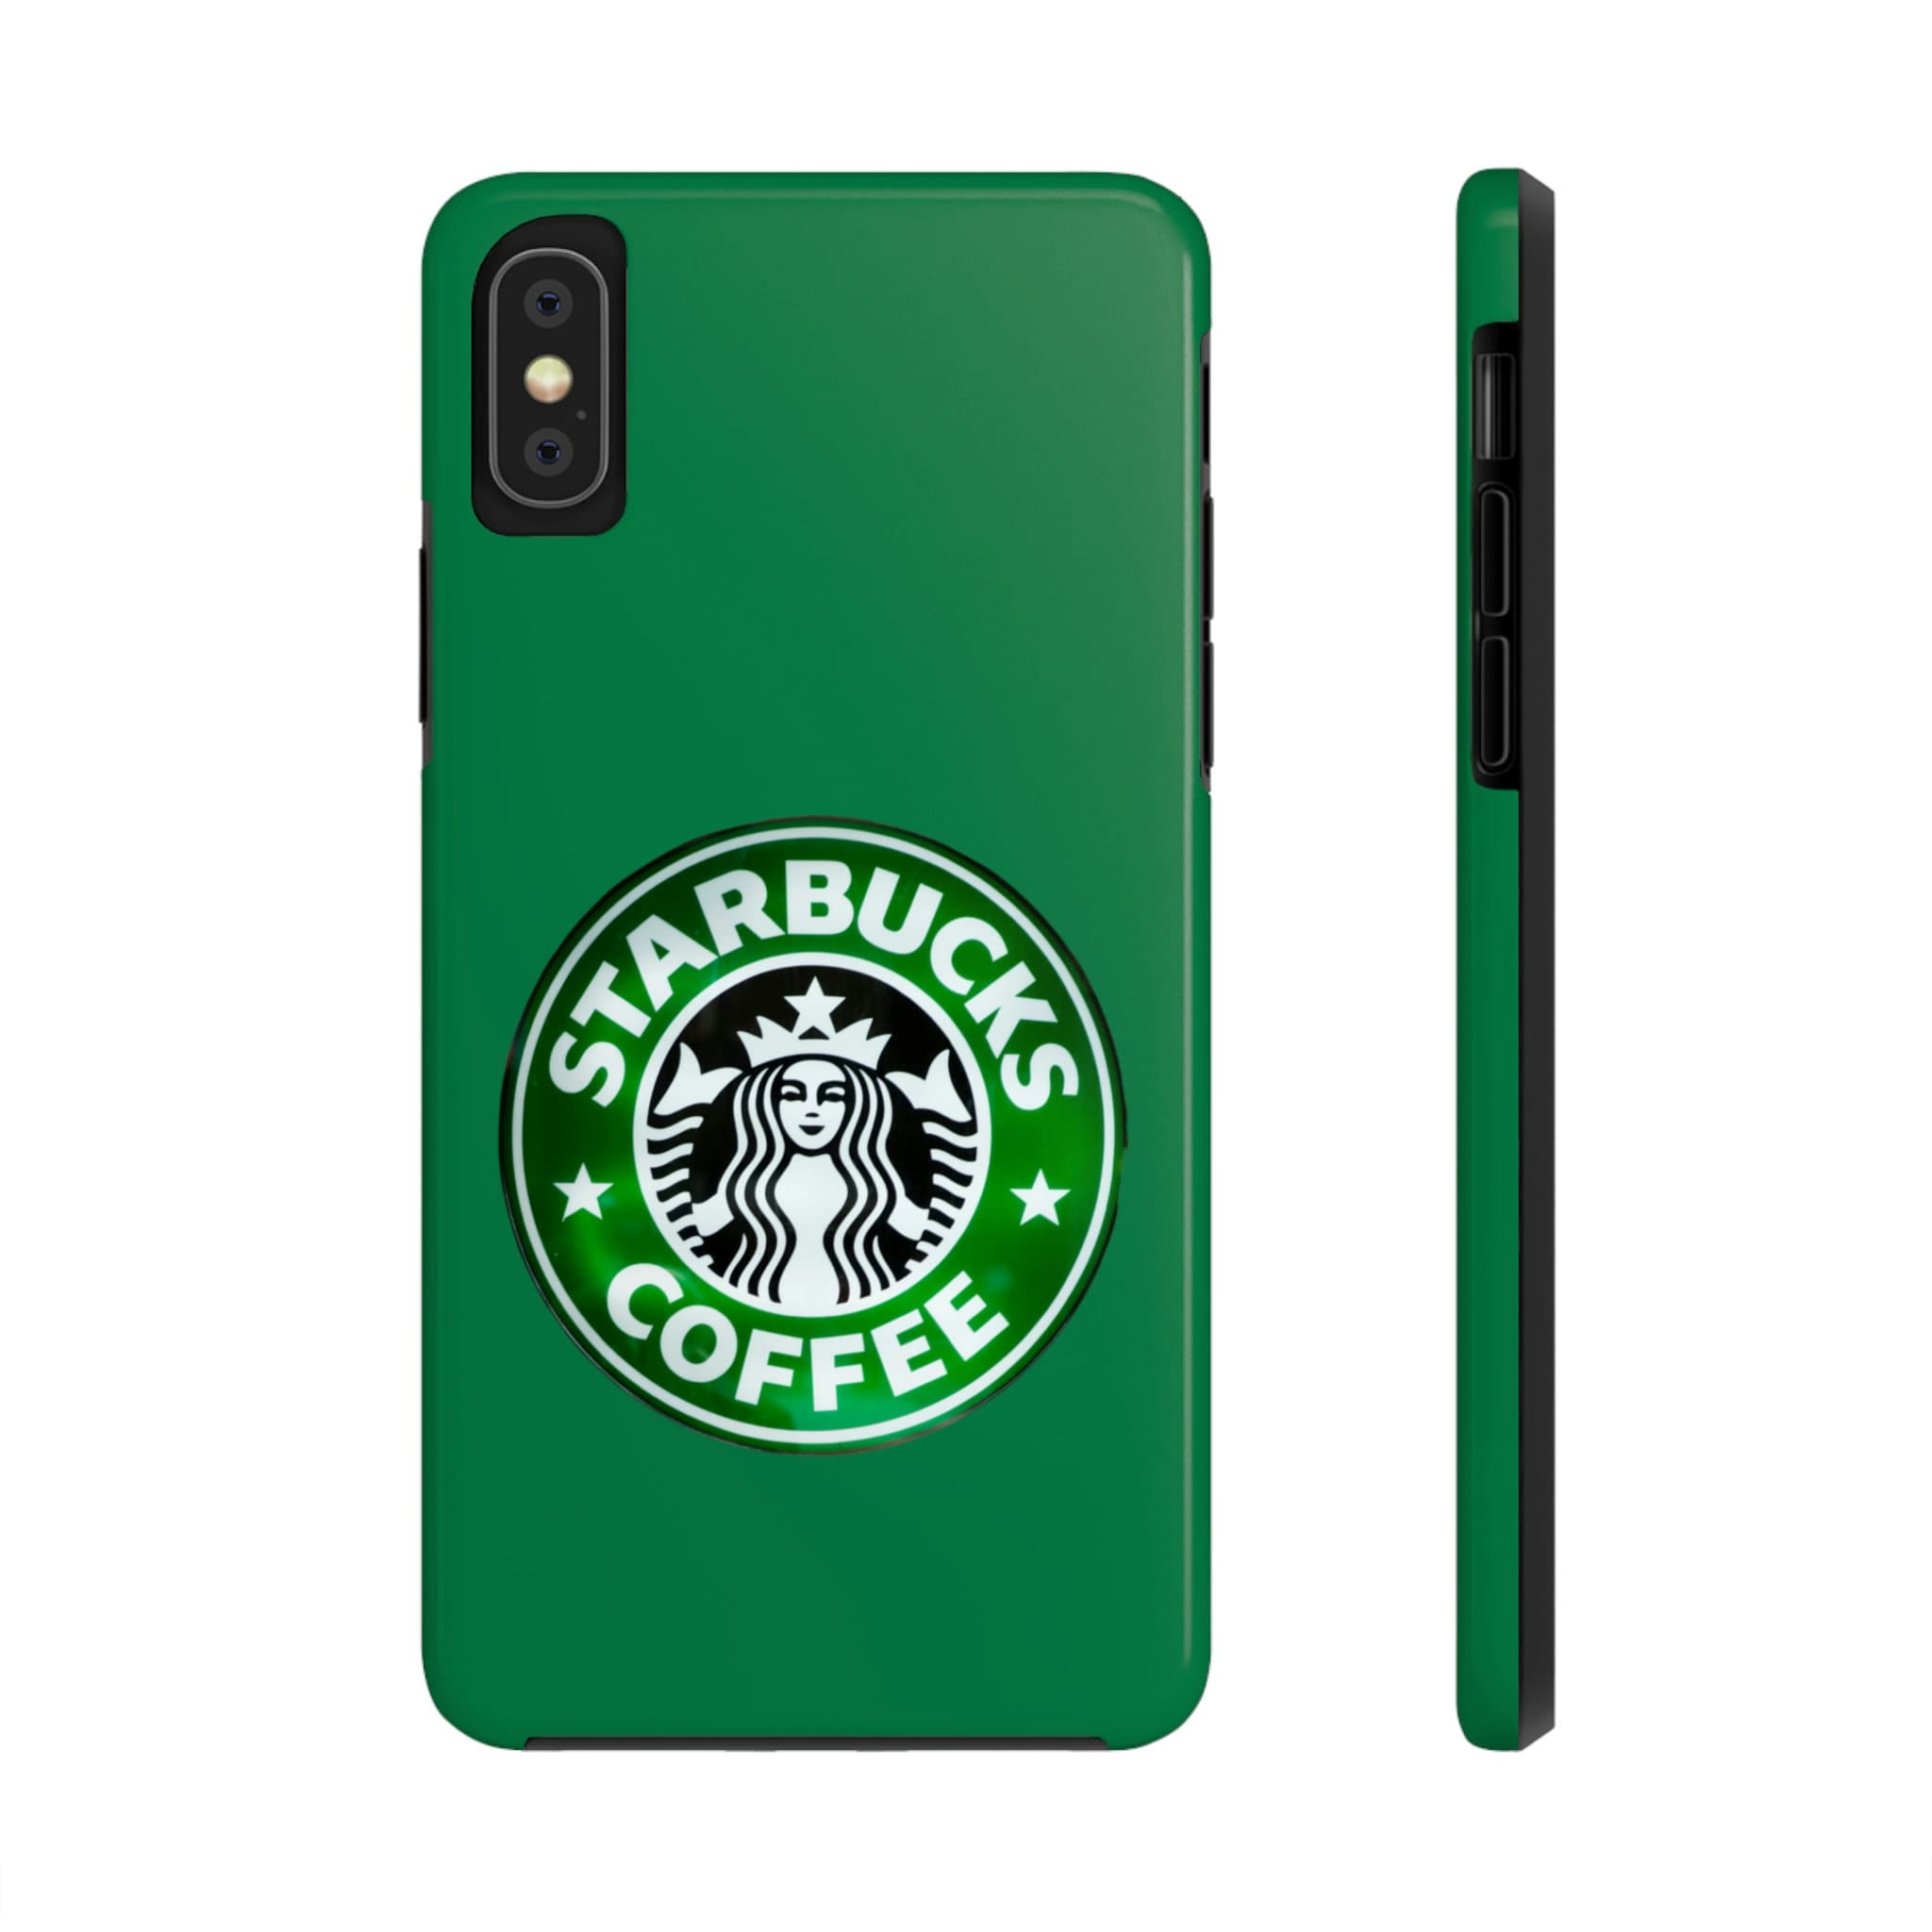 Samsung X Starbucks create eco-friendly cases for Galaxy products